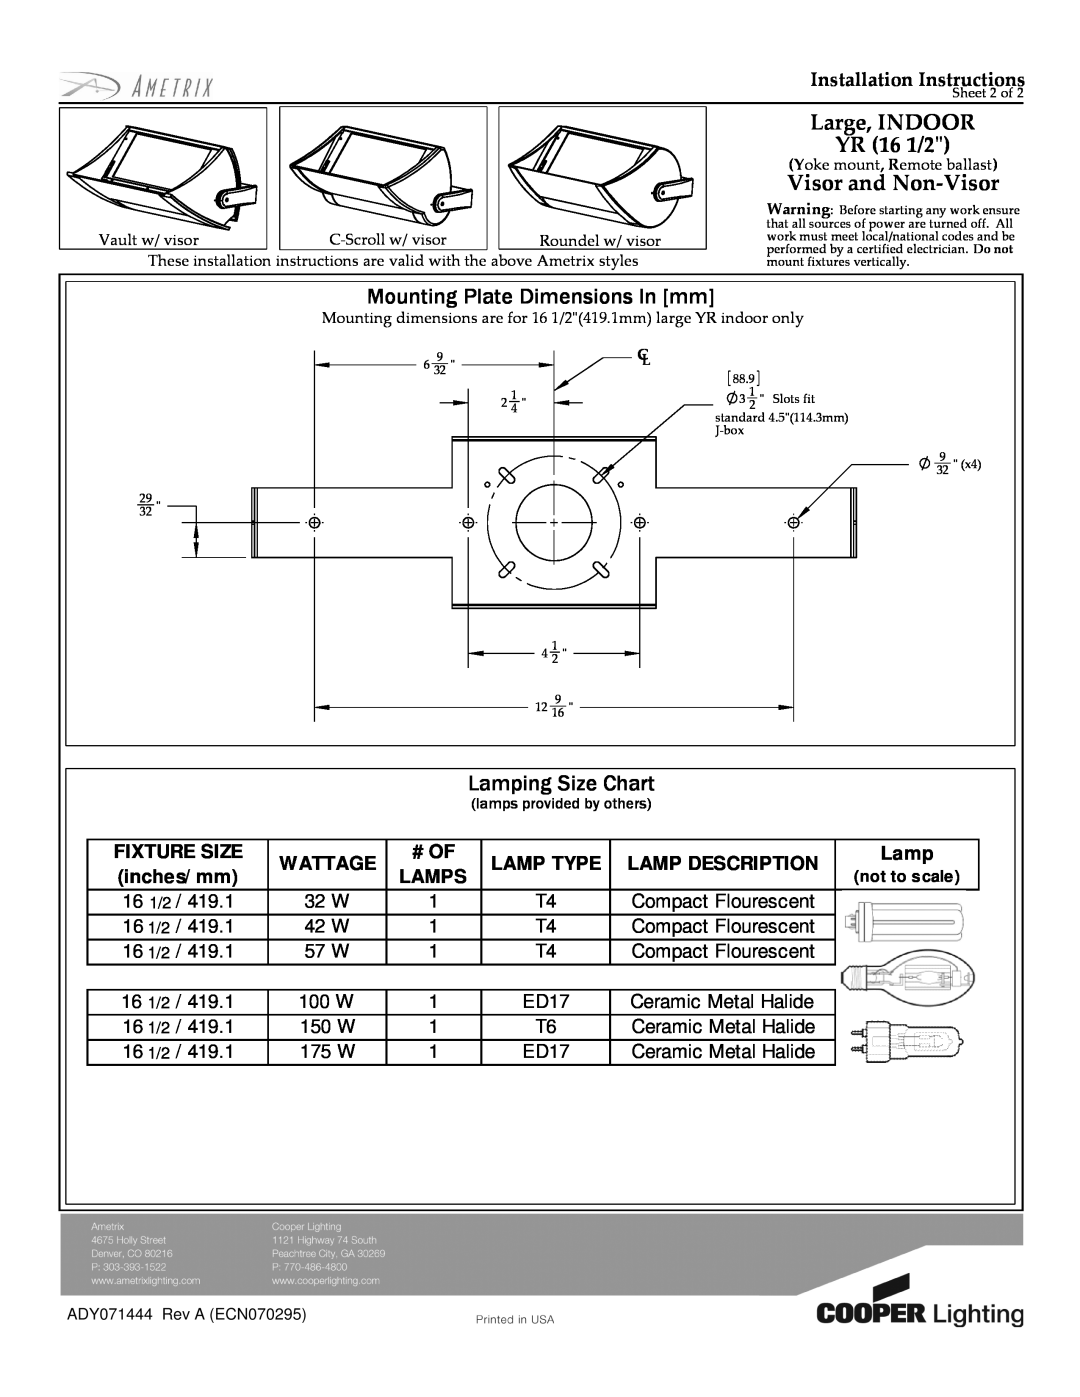 Cooper Lighting C-Scroll Large, INDOOR YR 16 1/2, Visor and Non-Visor, Mounting Plate Dimensions In mm, Lamping Size Chart 